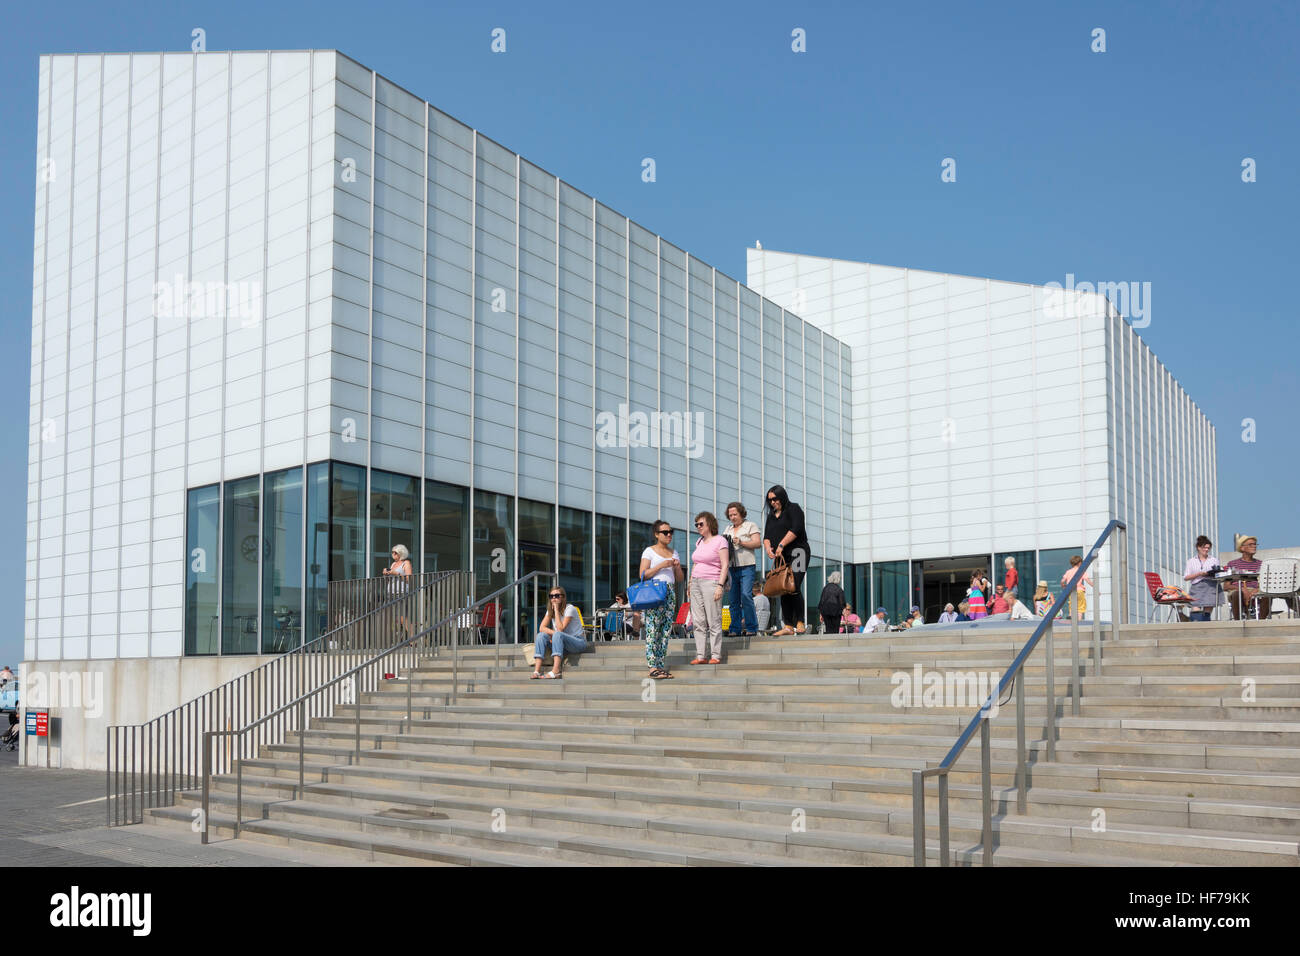 Turner Contemporary Gallery, le Rendezvous, Margate, Kent, Angleterre, Royaume-Uni Banque D'Images